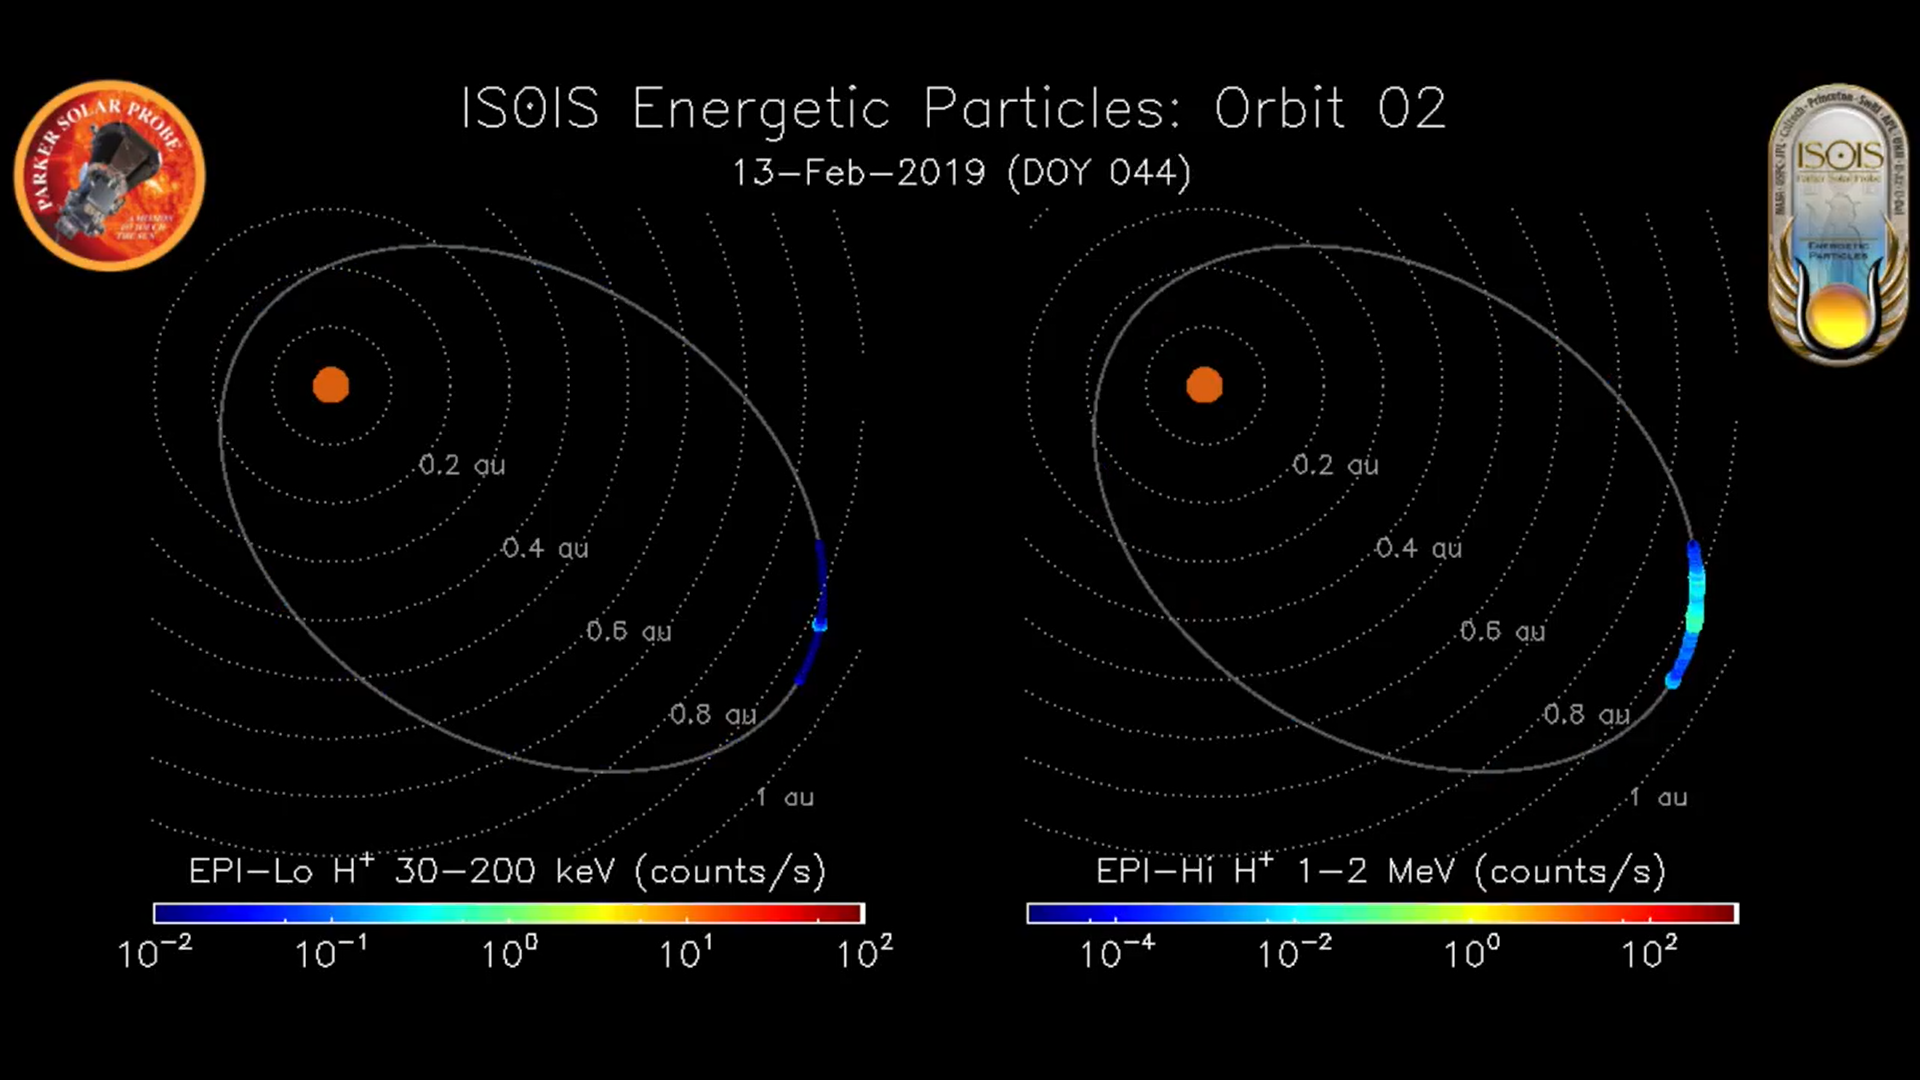 Graphic showing two, side-by-side depictions of Parker Solar Probe's orbit around the Sun, with colorful dots plotting along the orbit to show where different types of energetic particles were found